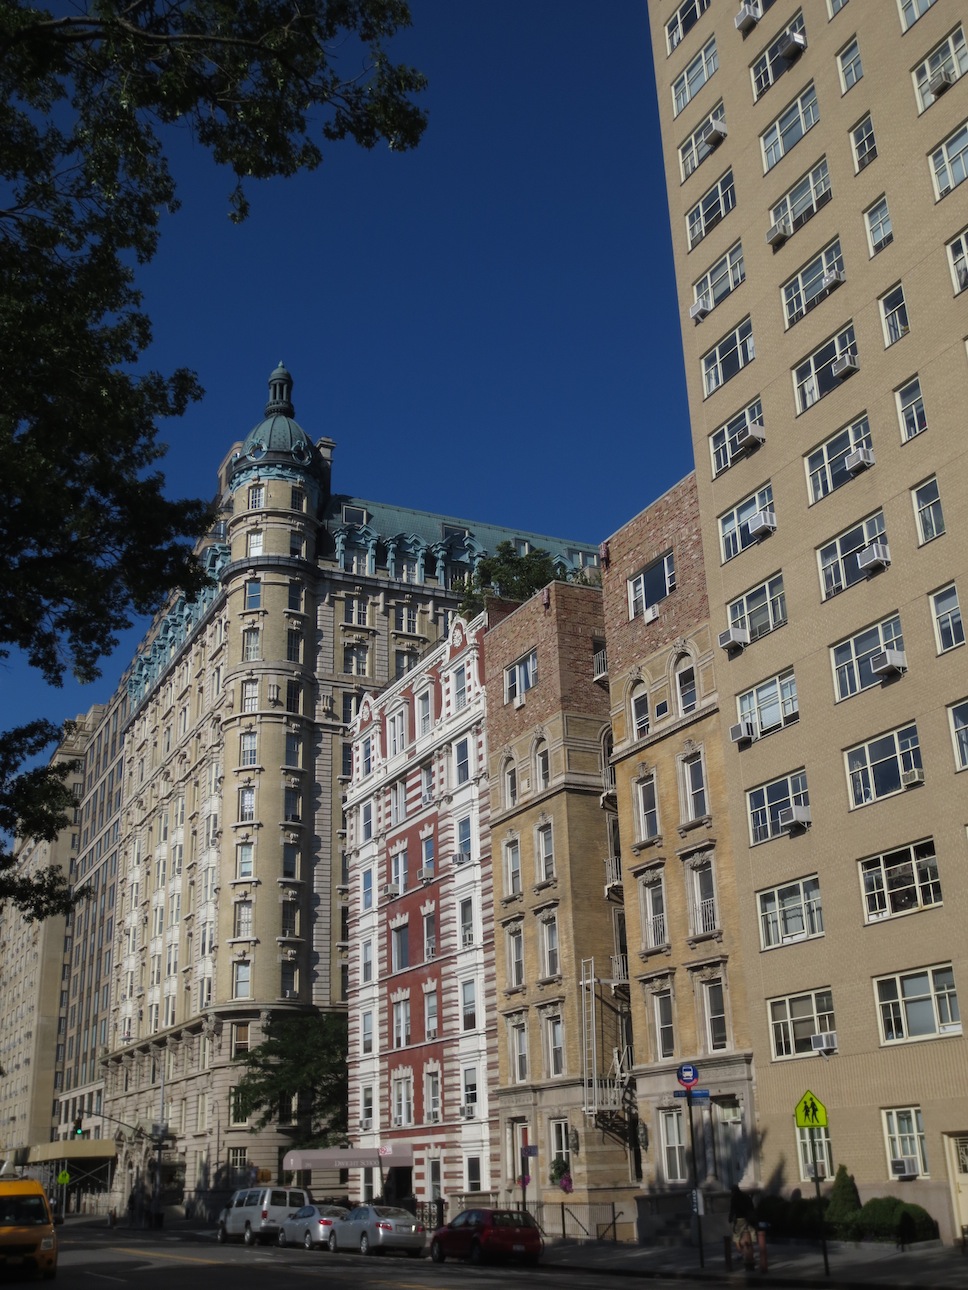 Buildings on the Upper West Side.